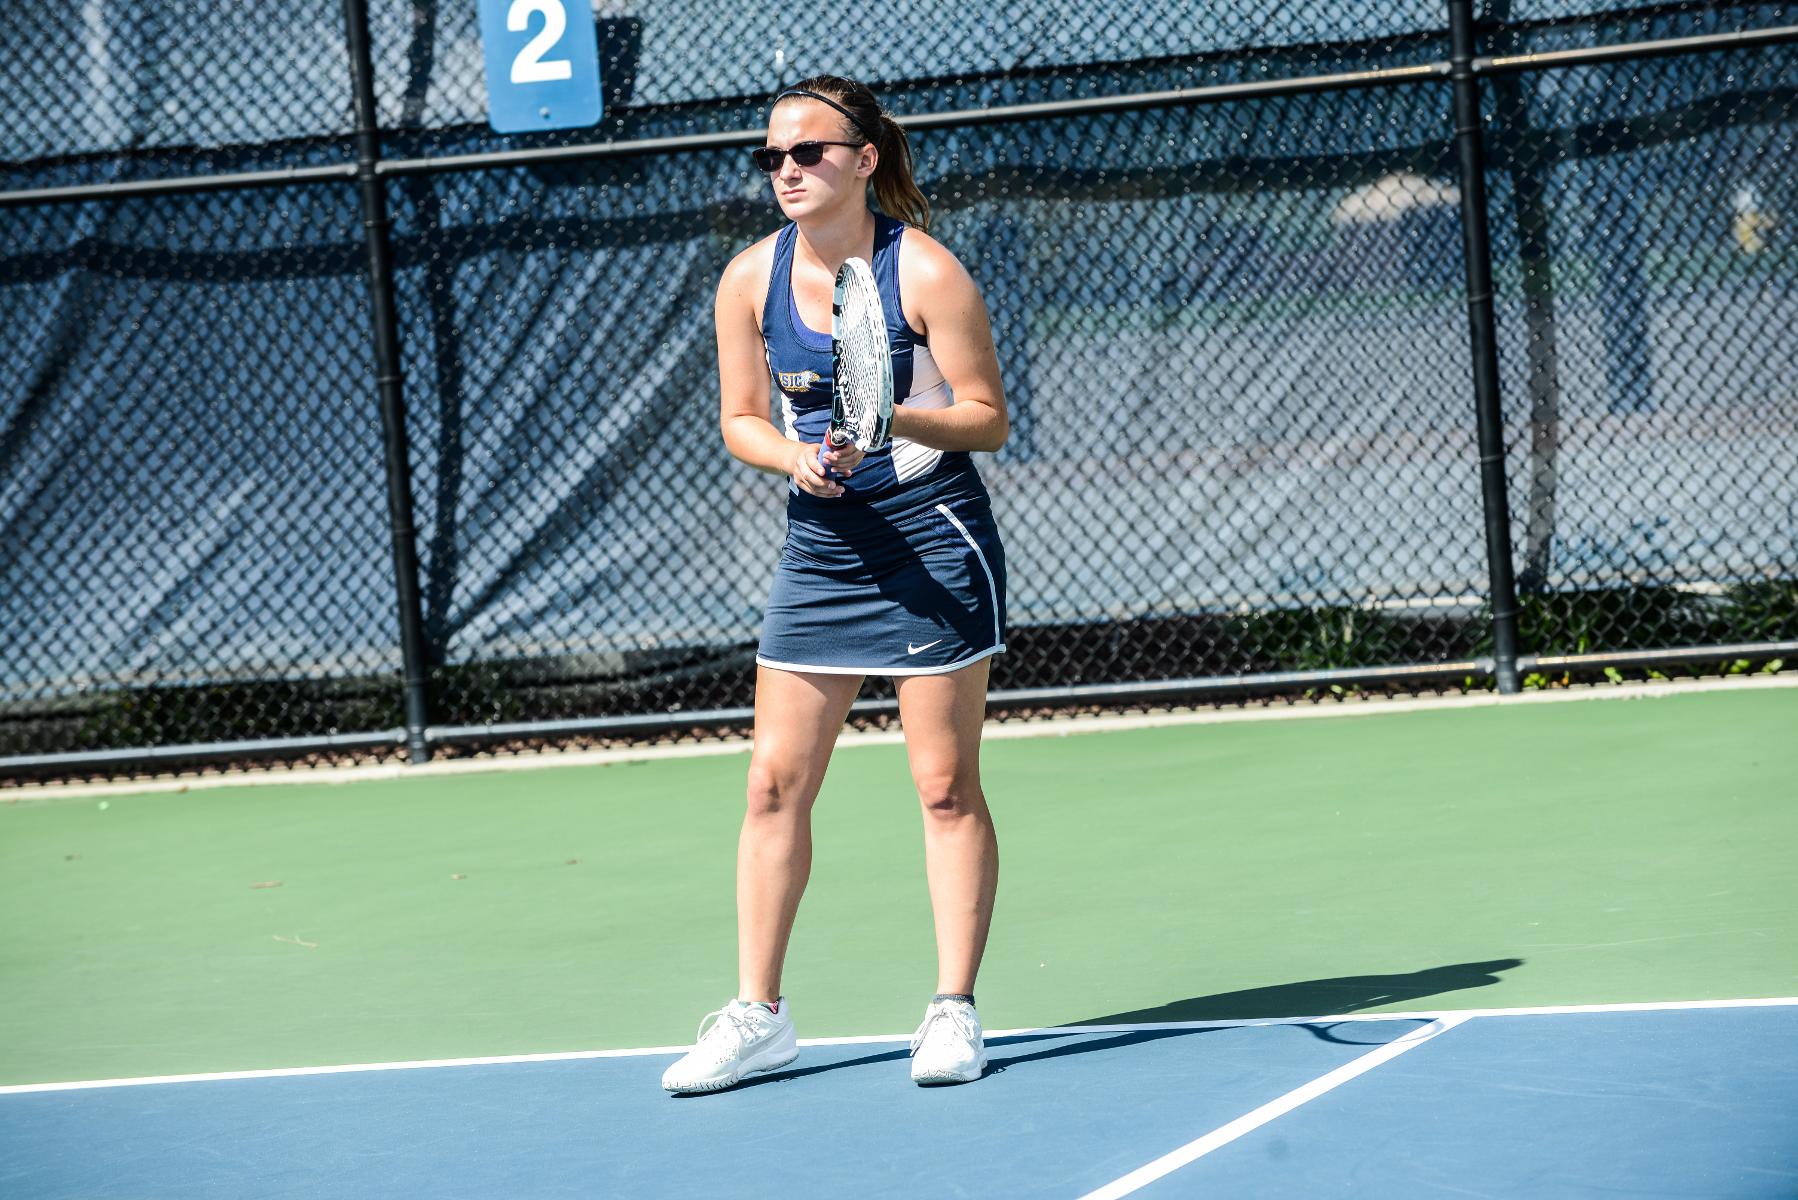 Women's Tennis Opens its 2017 Campaign on Saturday